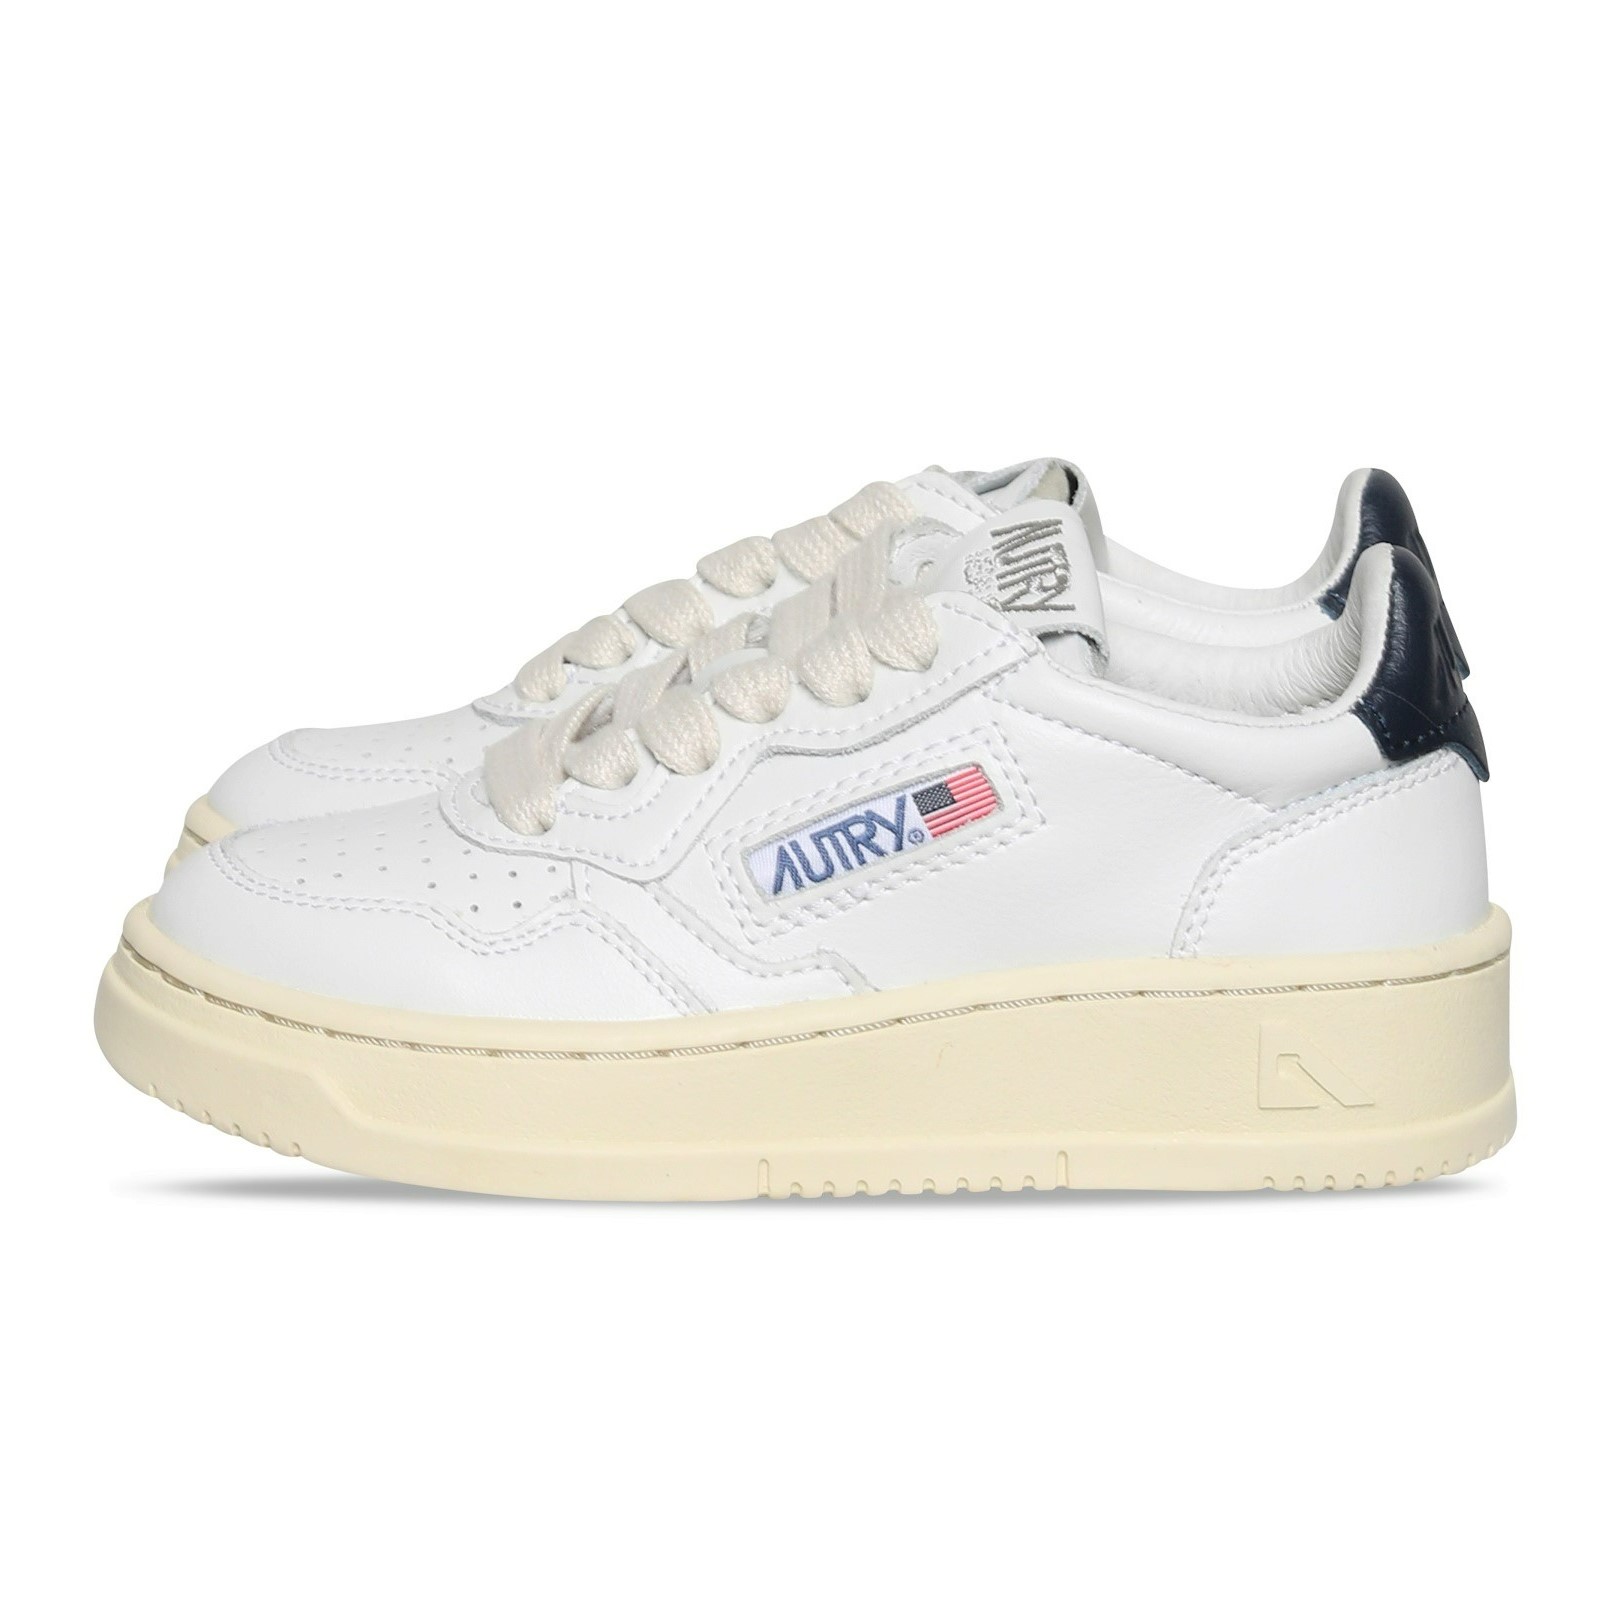 -Kids- Autry Action Shoes Low Sneaker in White/Blue 27